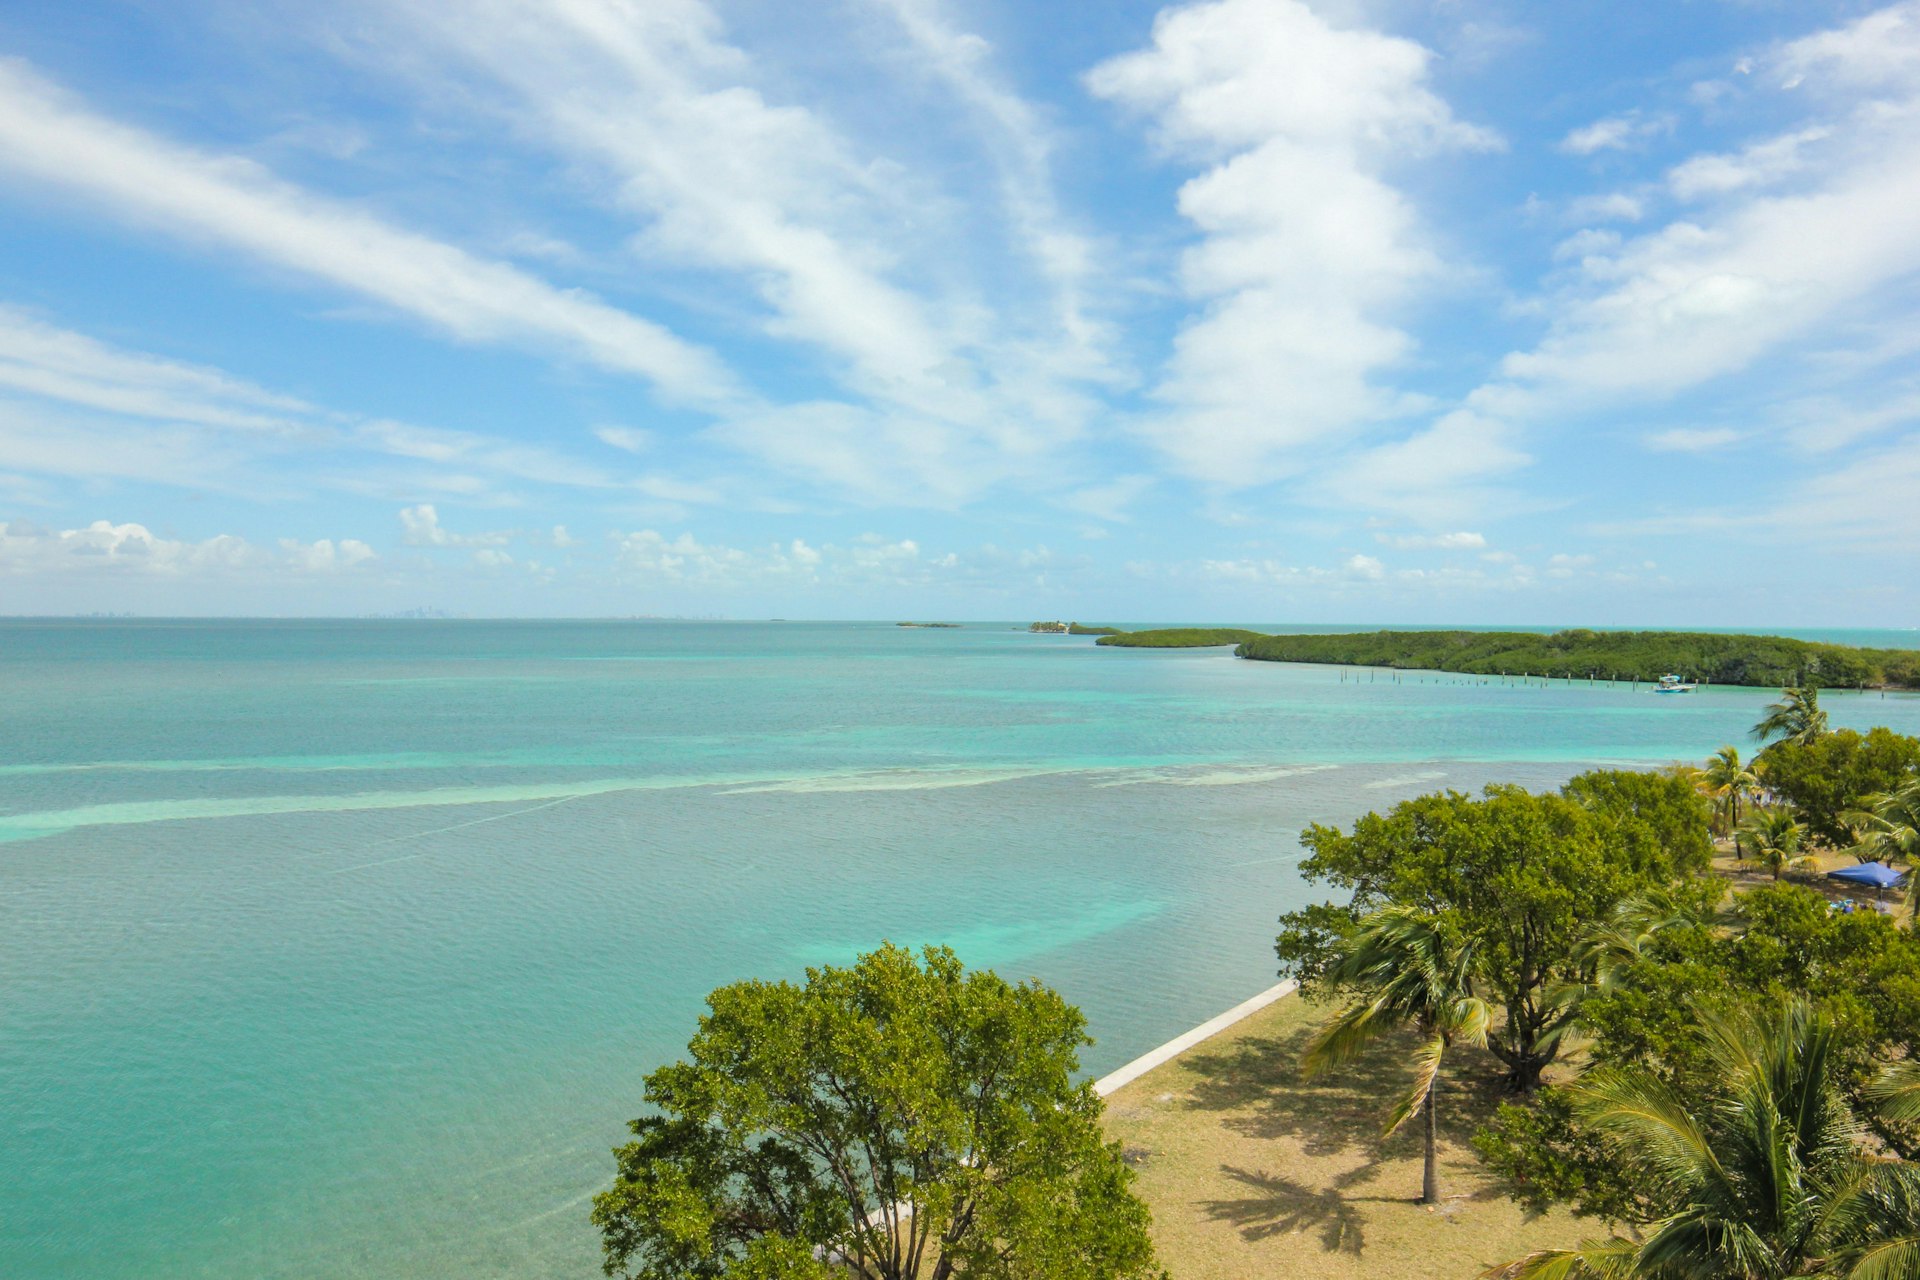 The absolutely magnificent Biscayne National Park located south of Miami, Florida